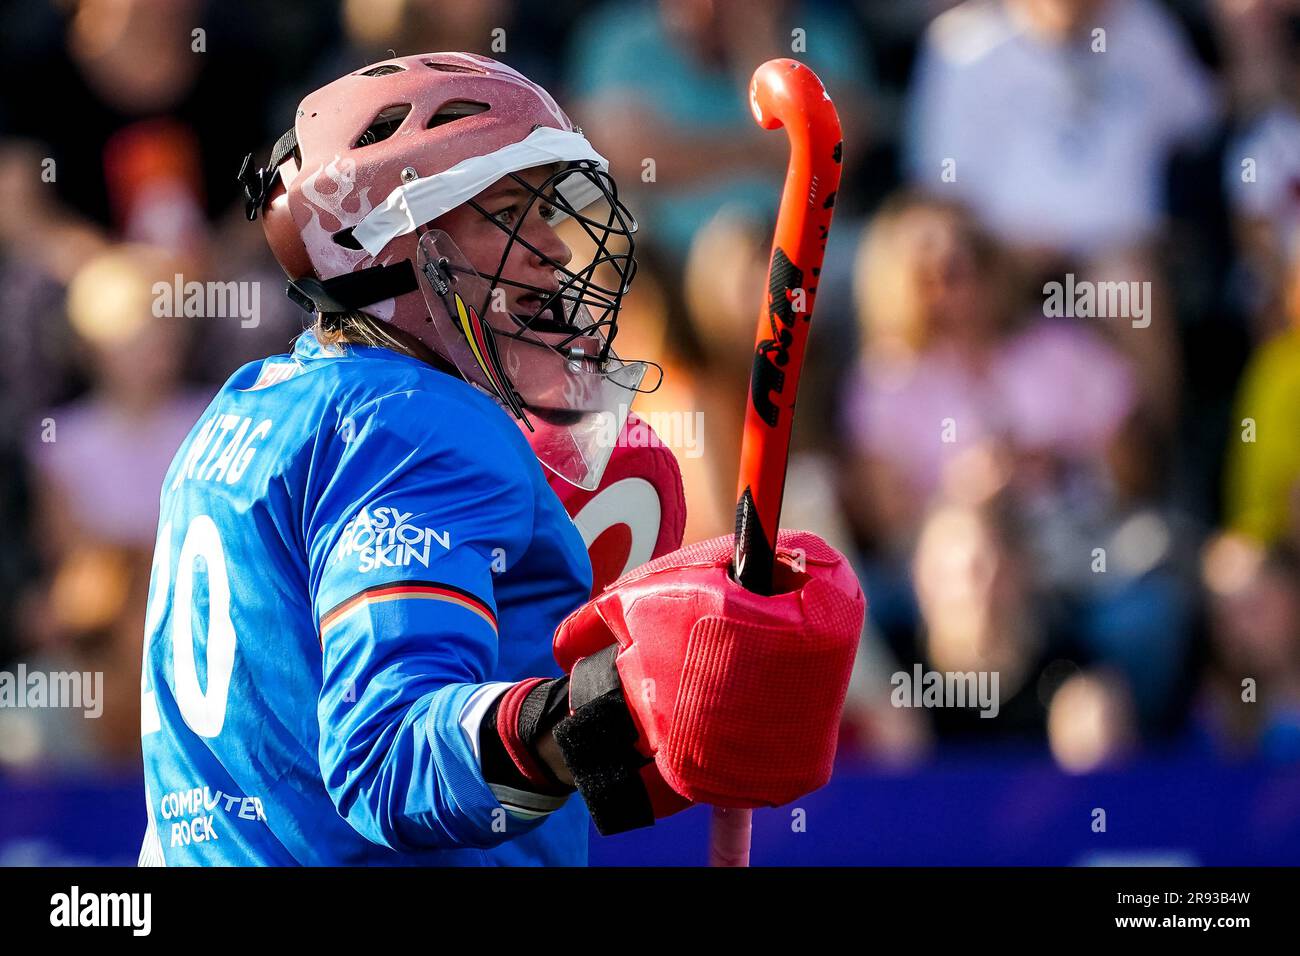 Amstelveen, Netherlands. 23rd June, 2023. AMSTELVEEN, NETHERLANDS - JUNE 23: Julia Sonntag of Germany looks on during the FIH Hockey Pro League Women's match between Netherlands and Germany at the Wagener Stadion on June 23, 2023 in Amstelveen, Netherlands (Photo by Rene Nijhuis/BSR Agency) Credit: BSR Agency/Alamy Live News Stock Photo